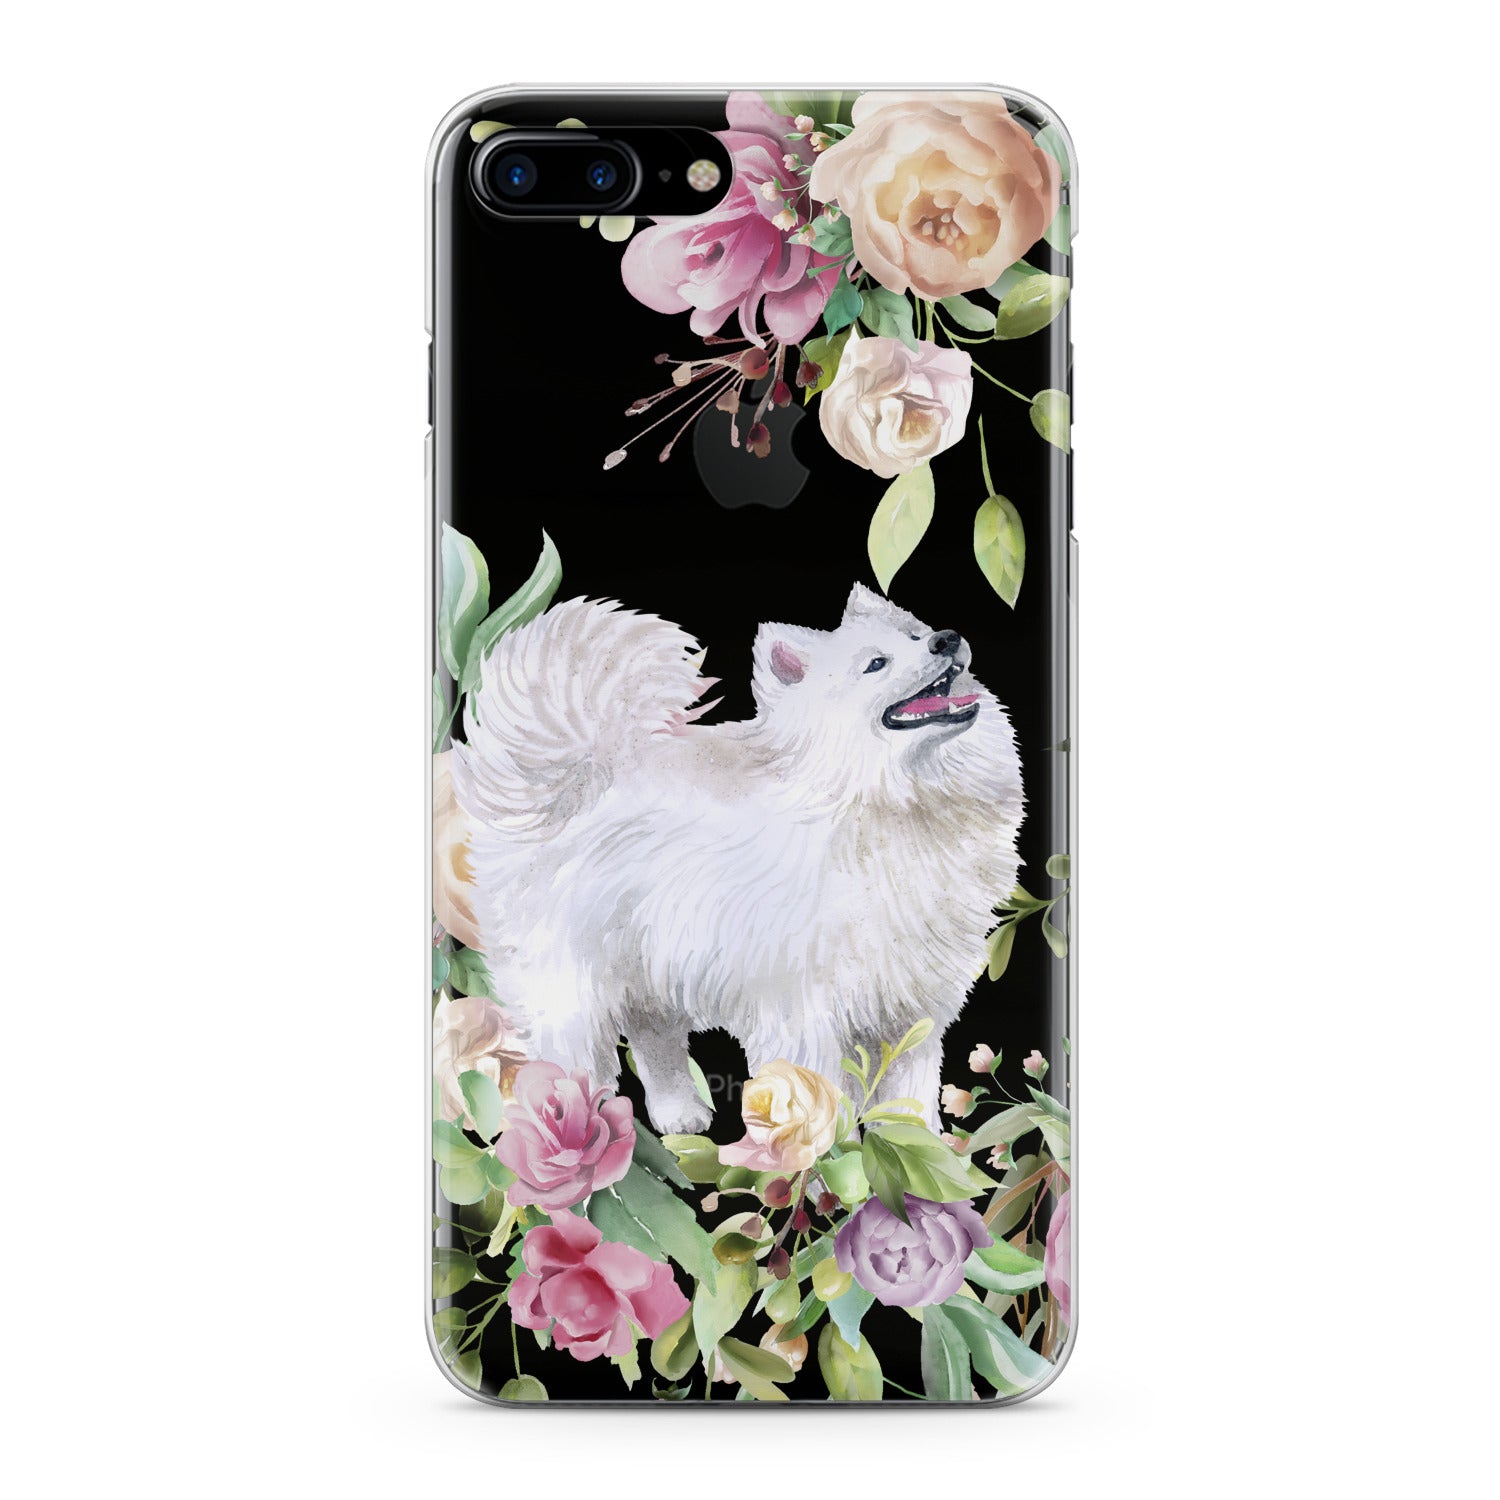 Lex Altern White Samoyed Dog Phone Case for your iPhone & Android phone.